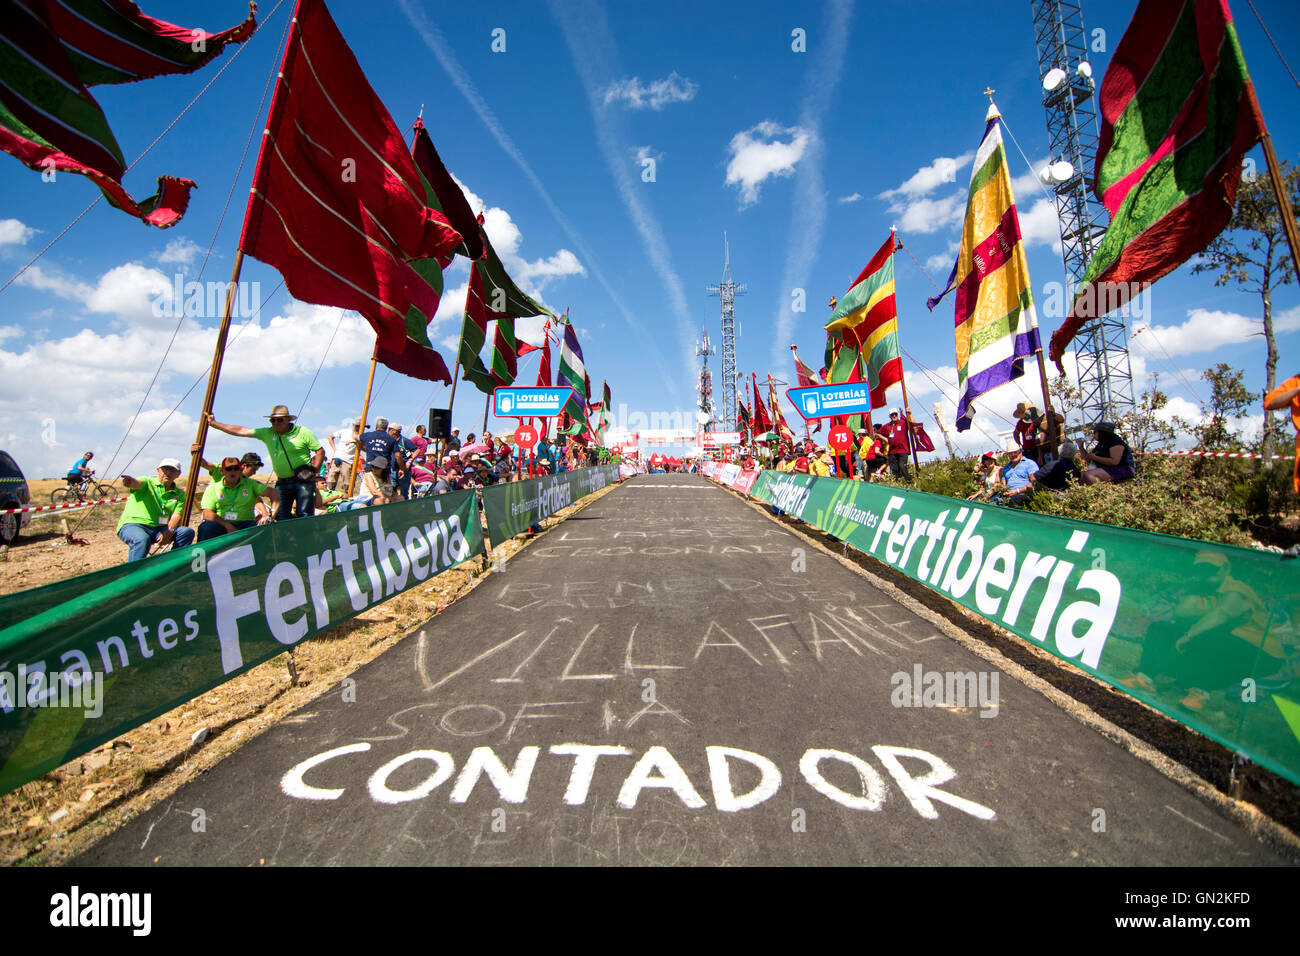 La Camperona, Spain. 27th August, 2016. Last 50 metres of 8th stage of cycling race ‘La Vuelta a España’ (Tour of Spain) between Villalpando and Climb of La Camperona on August 27, 2016 in Leon, Spain. Credit: David Gato/Alamy Live News Stock Photo